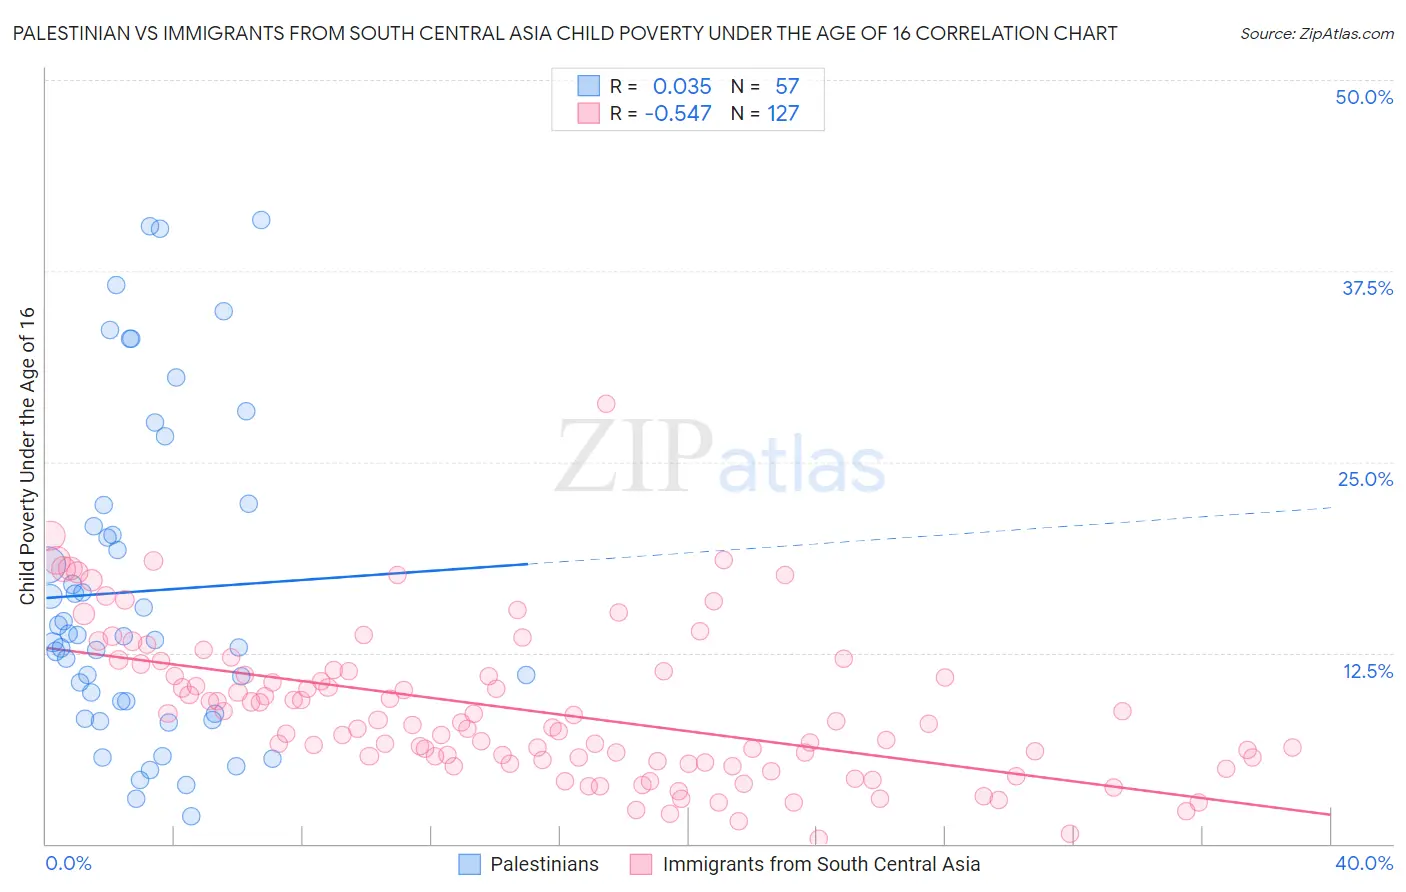 Palestinian vs Immigrants from South Central Asia Child Poverty Under the Age of 16